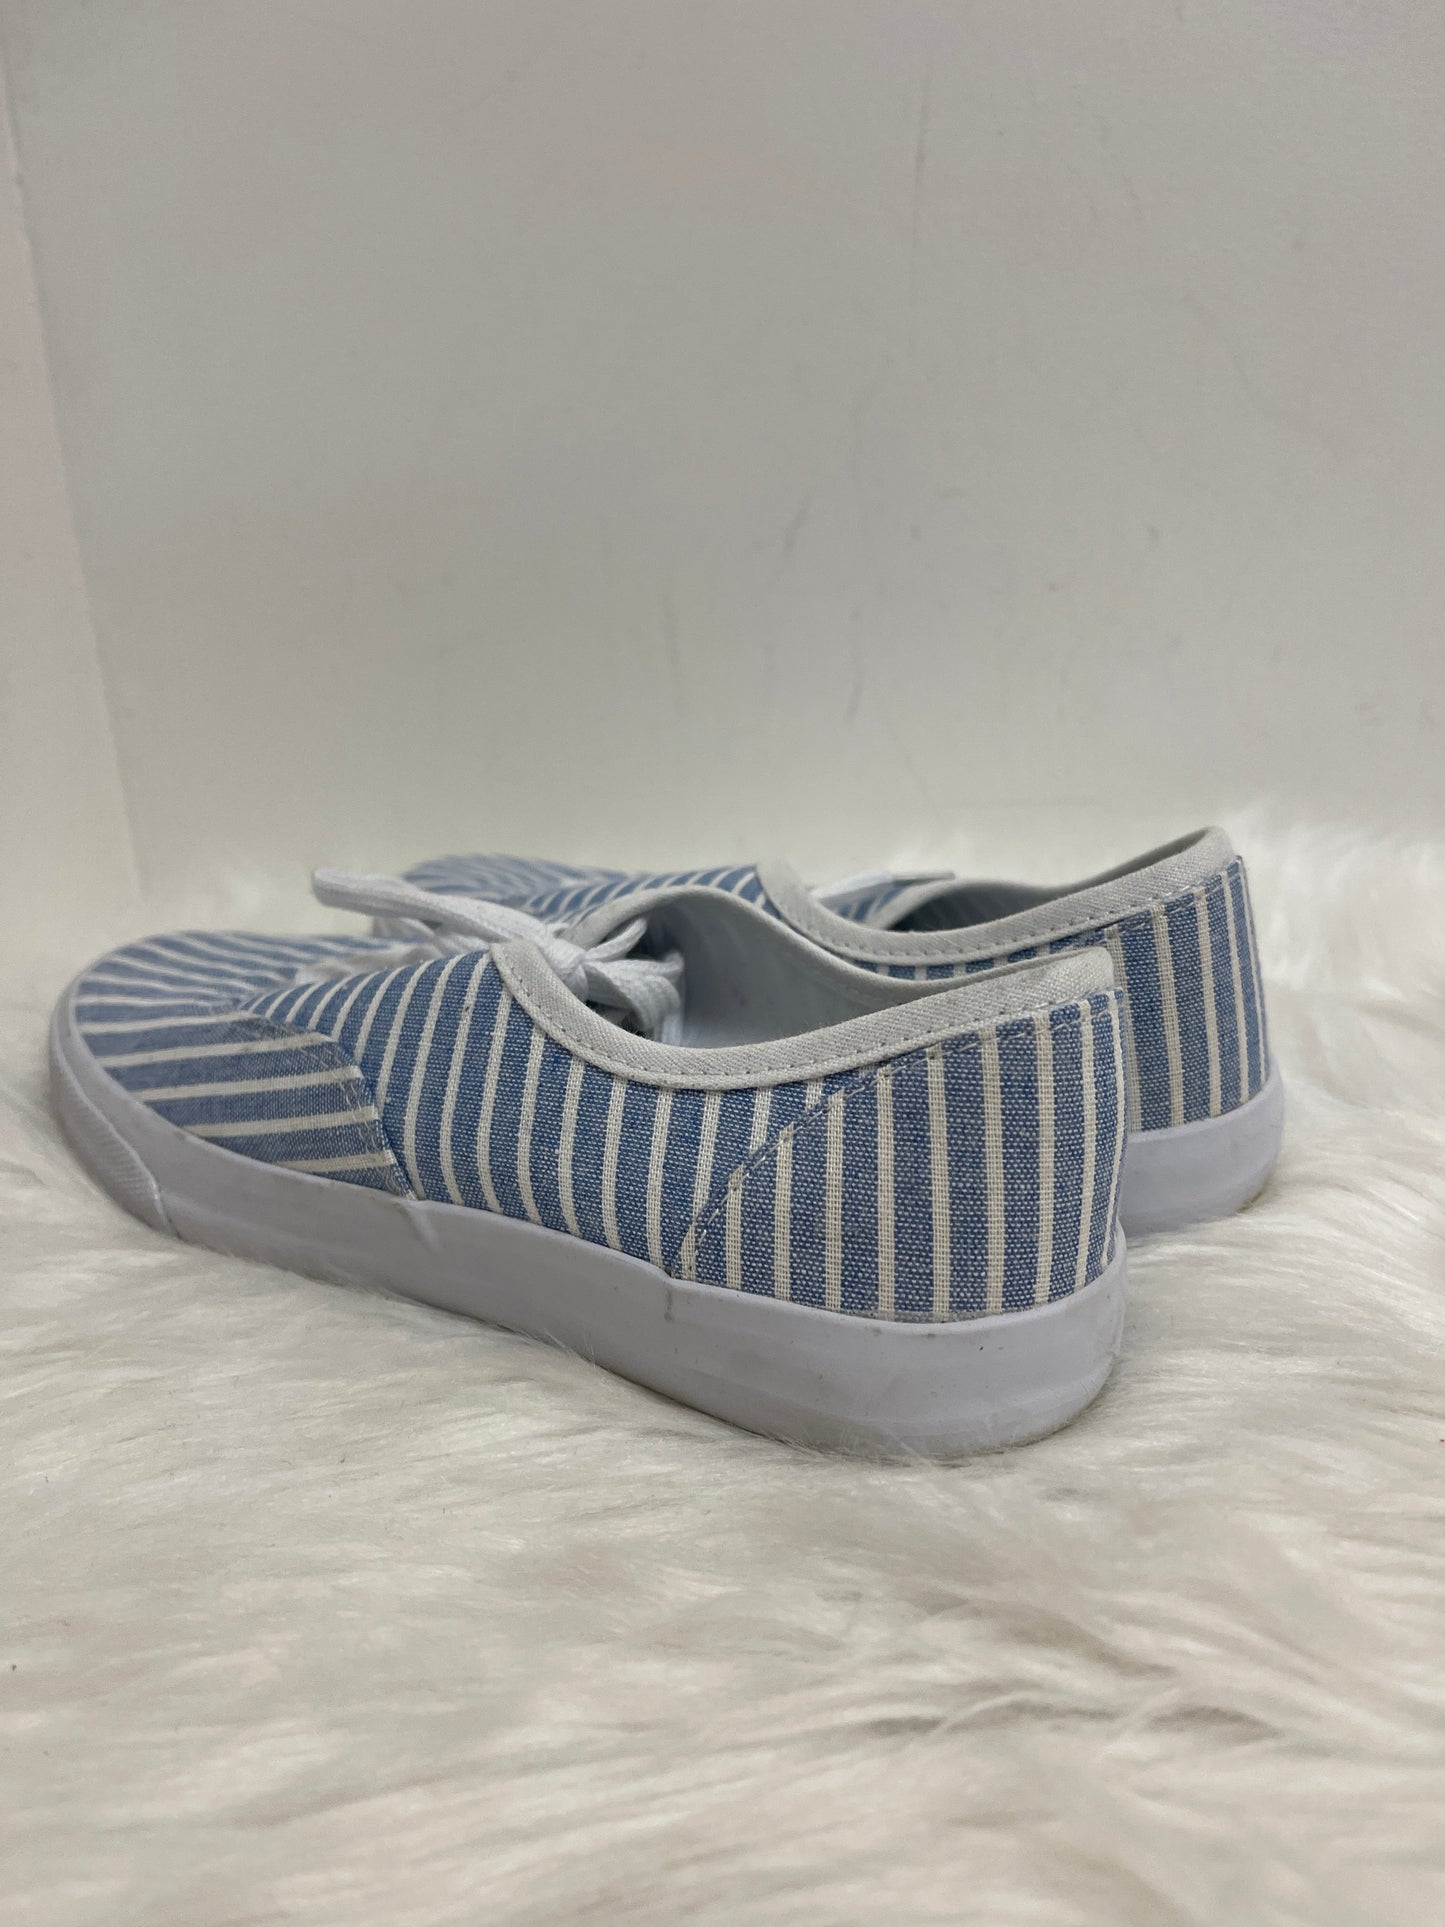 Blue Shoes Sneakers A New Day, Size 8